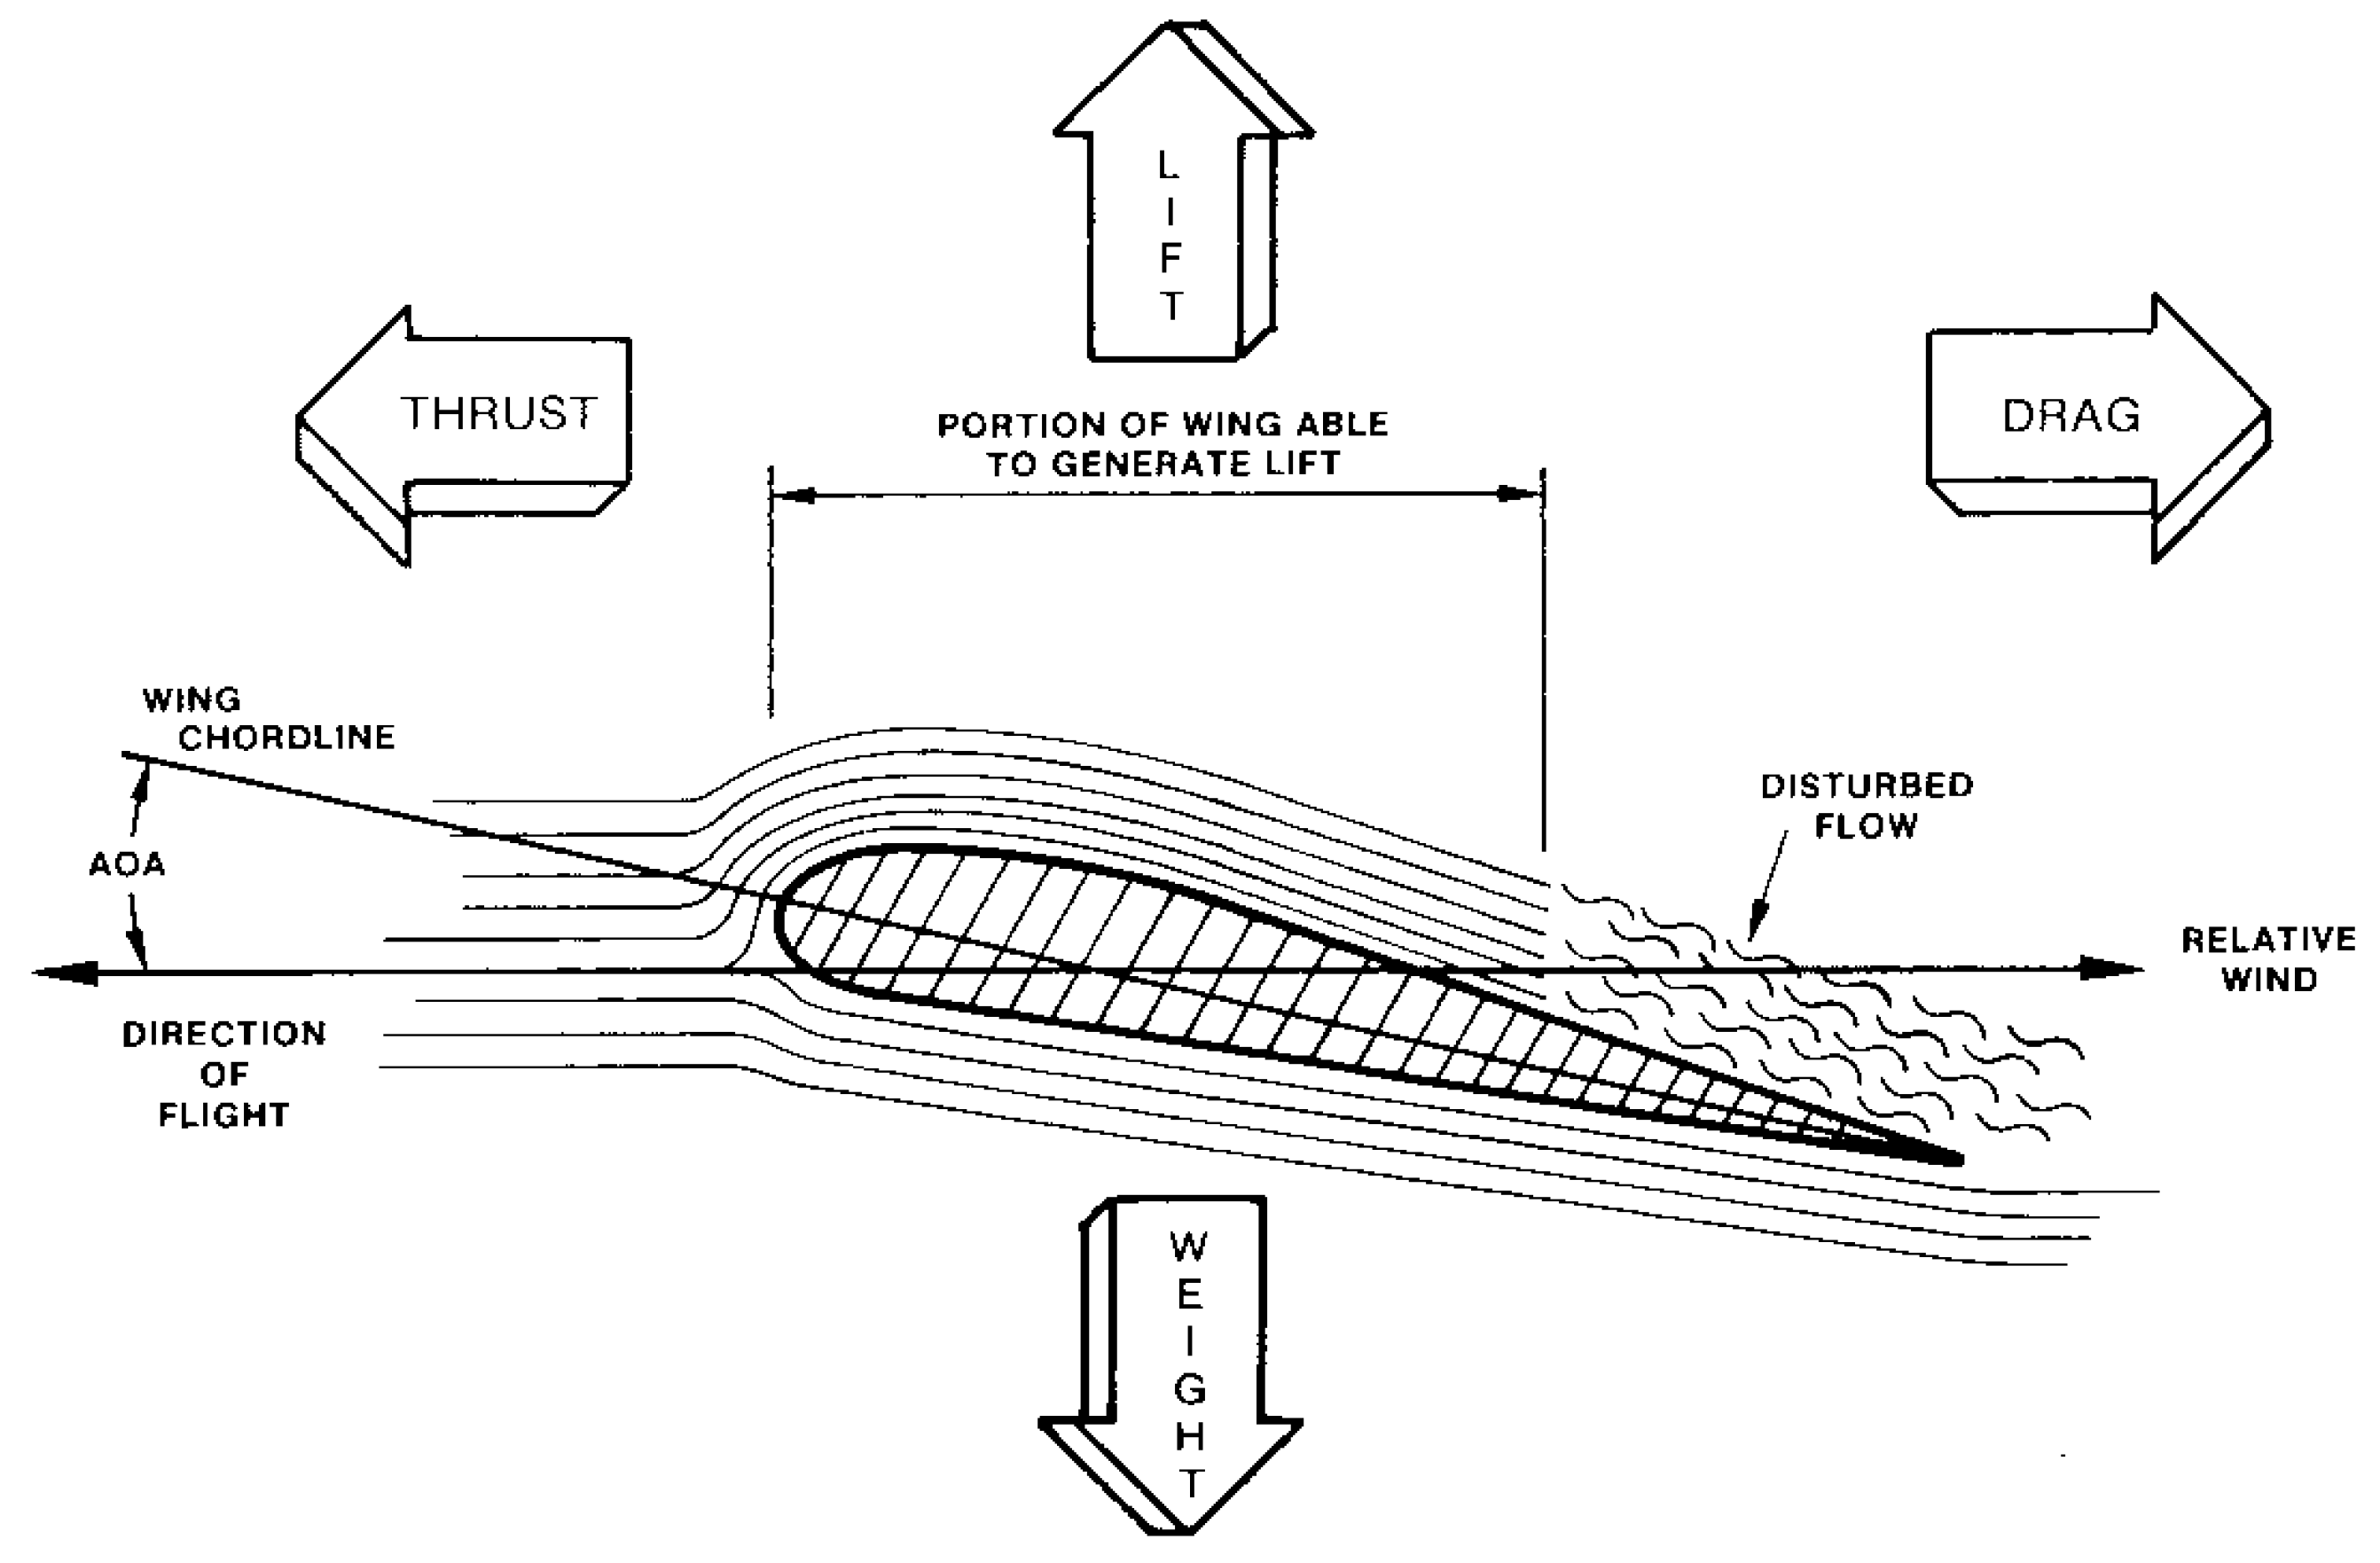 Figure 4. Angle of attack (AOA) is the angle between the wing mean aerodynamic chord and the direction of relative wind. If AOA rises above a critical value, the aircraft stalls and pilots are no longer able to effectively control the aircraft. This is because the wing no longer produces enough lift due to a separation of airflow from the wing and a transition from smooth to turbulent airflow over the wing. Source: UTC Aerospace Systems (Click image to enlarge)